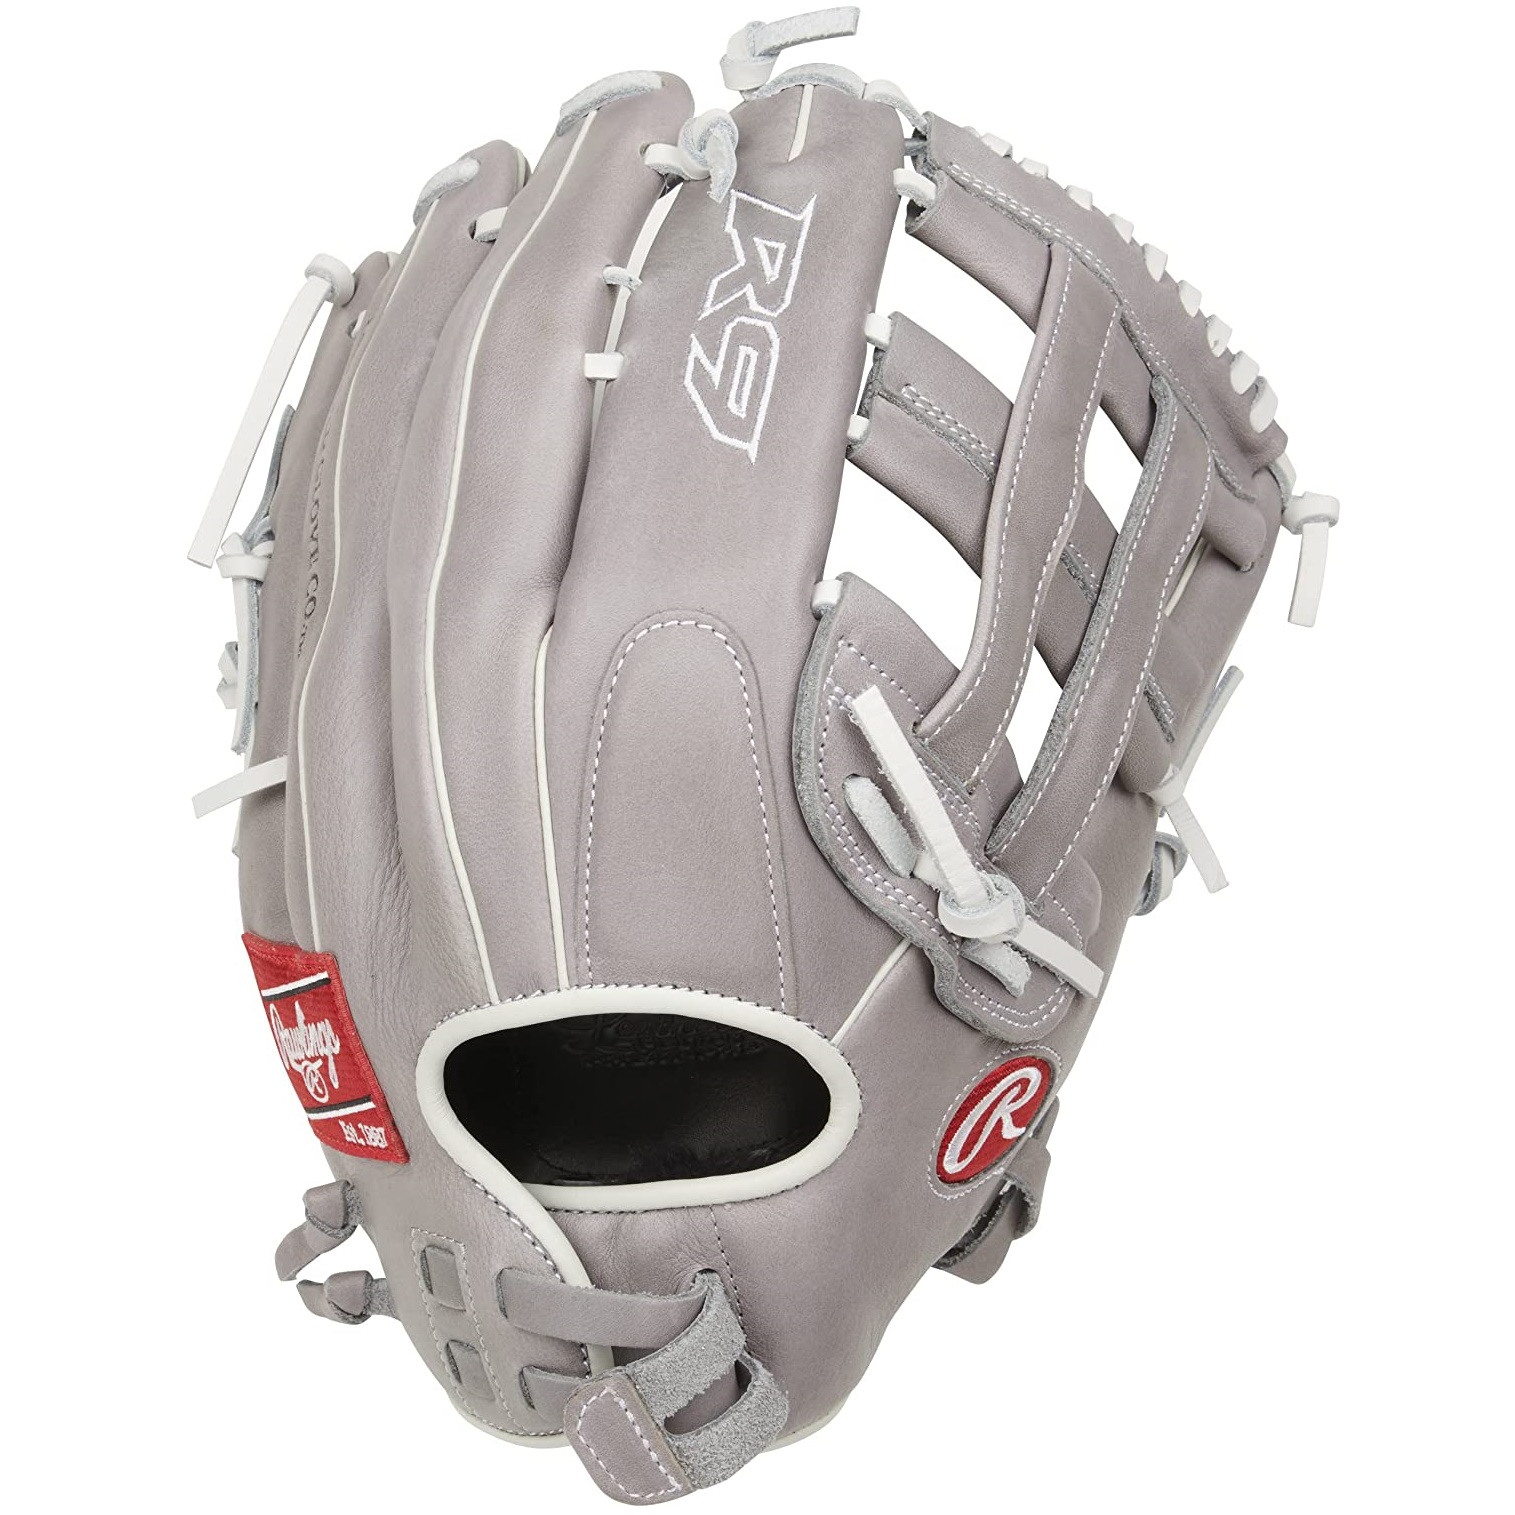 rawlings-r9-fastpitch-softball-glove-13-inch-right-hand-throw R9SB130-6G-RightHandThrow Rawlings   This Rawlings R9 series features soft durable all-leather shells designed to